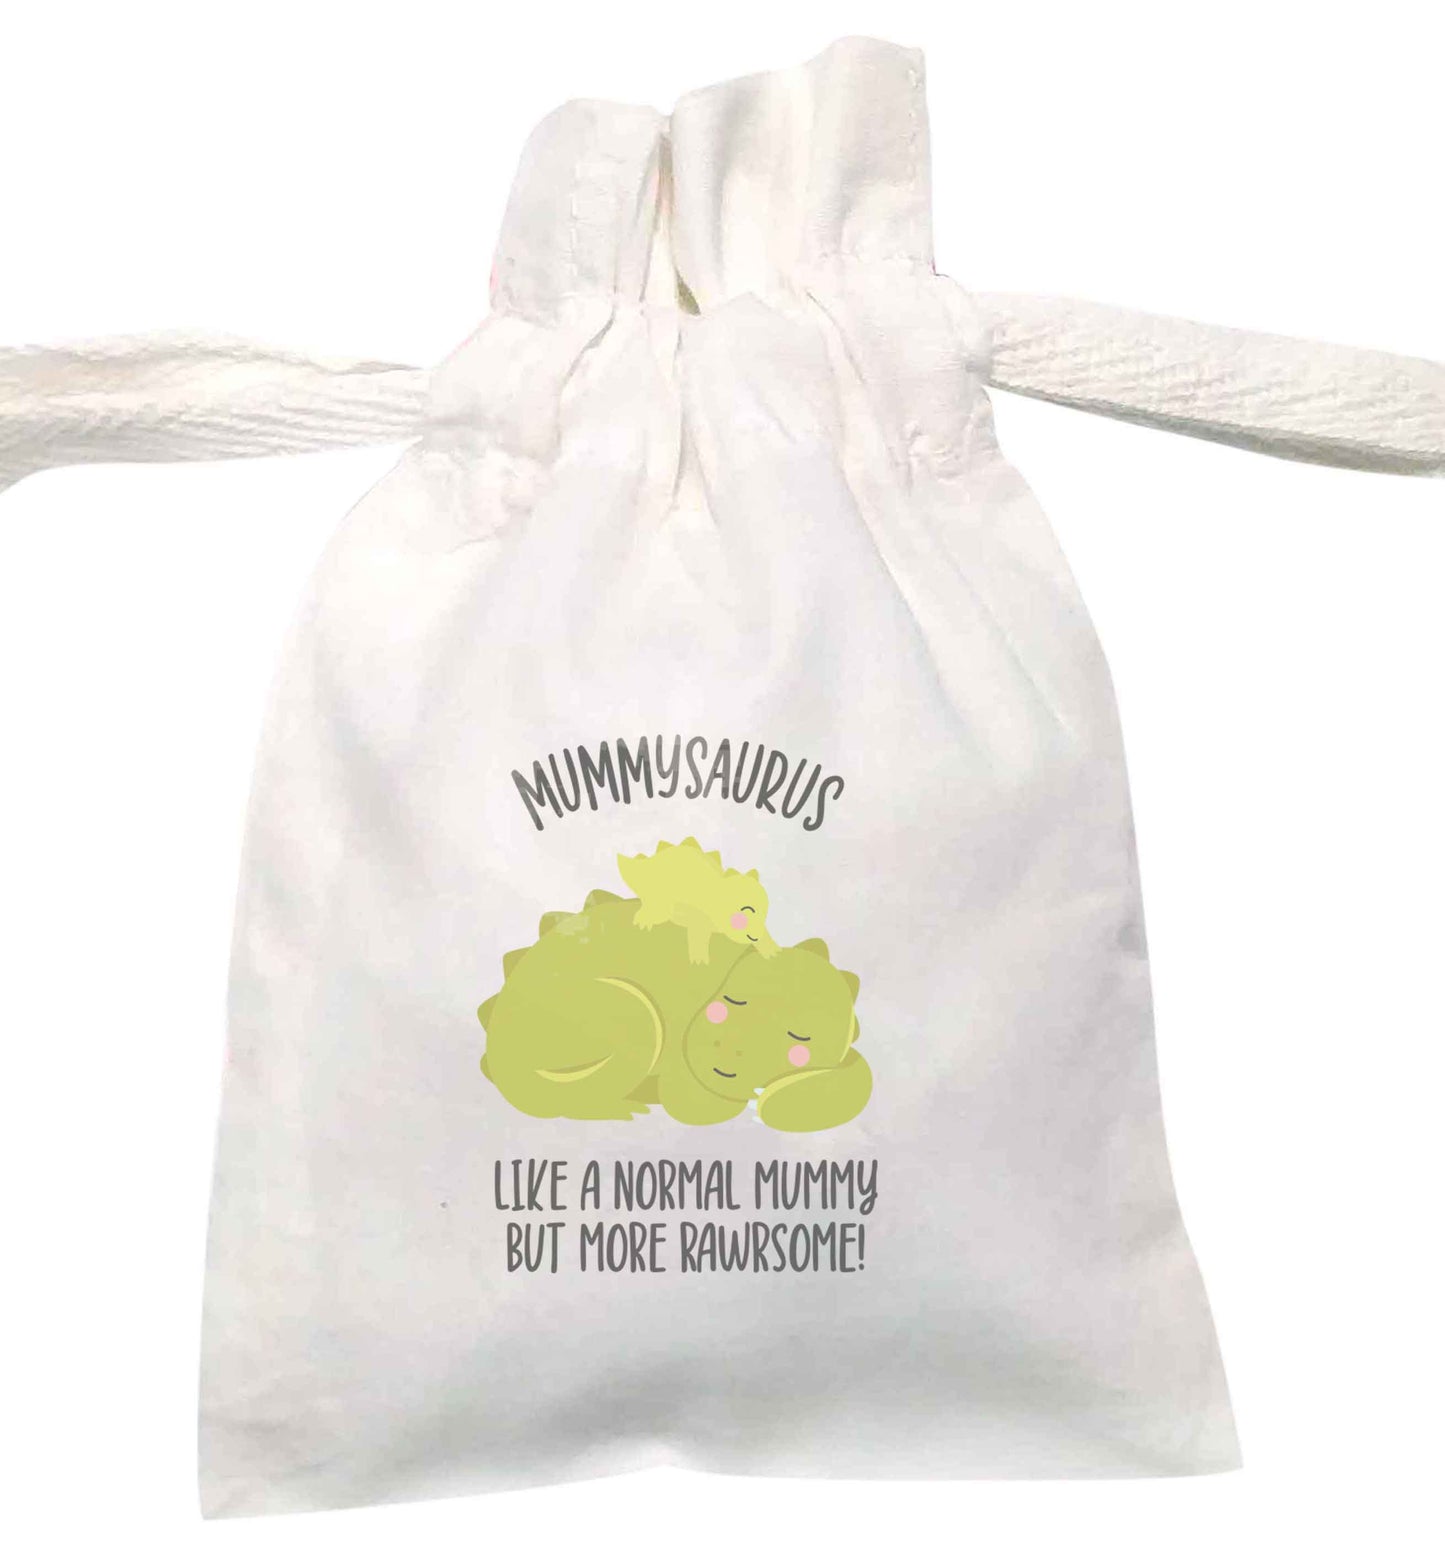 Mummysaurus like a normal mummy only more rawrsome | XS - L | Pouch / Drawstring bag / Sack | Organic Cotton | Bulk discounts available!